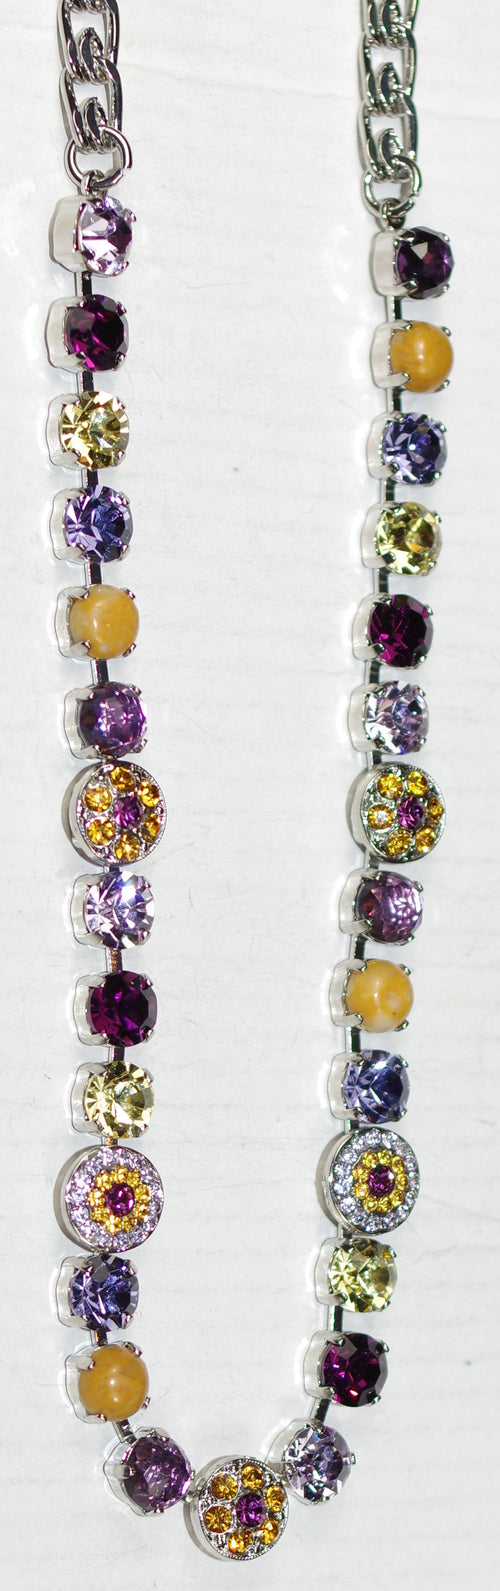 MARIANA NECKLACE SUNRISE: lavender, amber, purple, mineral, yellow stones in silver rhodium setting, 17" adjustable chain